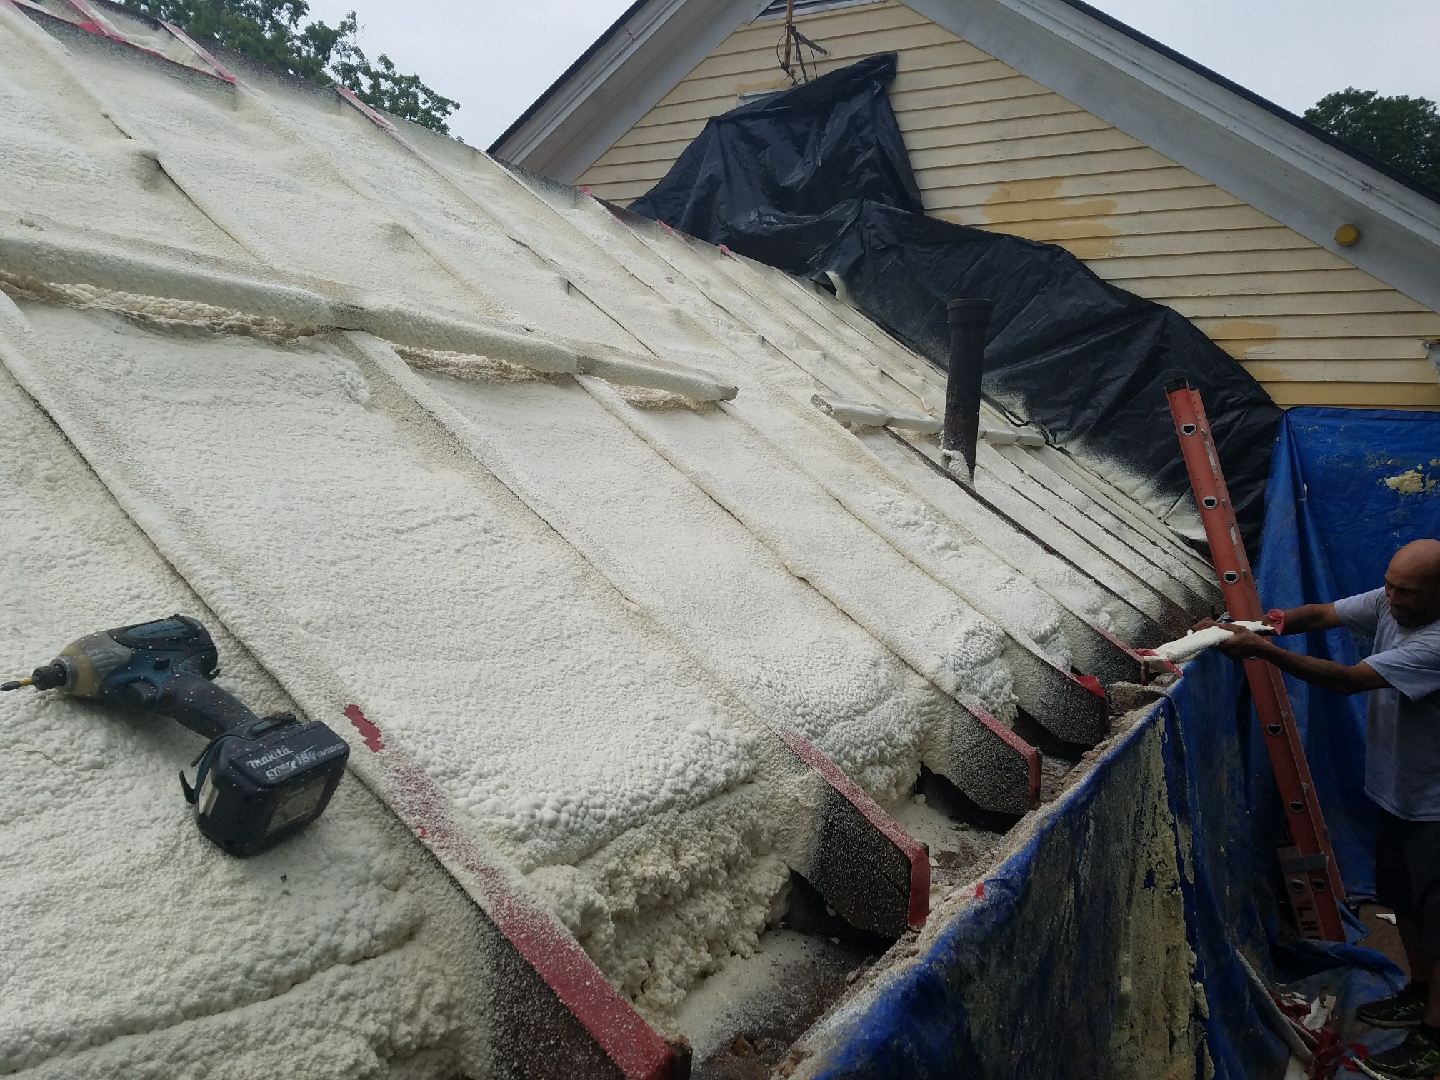 No more ICE DAMS! Closed Cell spray foam installed during roof replacement. North Amherst, MA - Foam USA